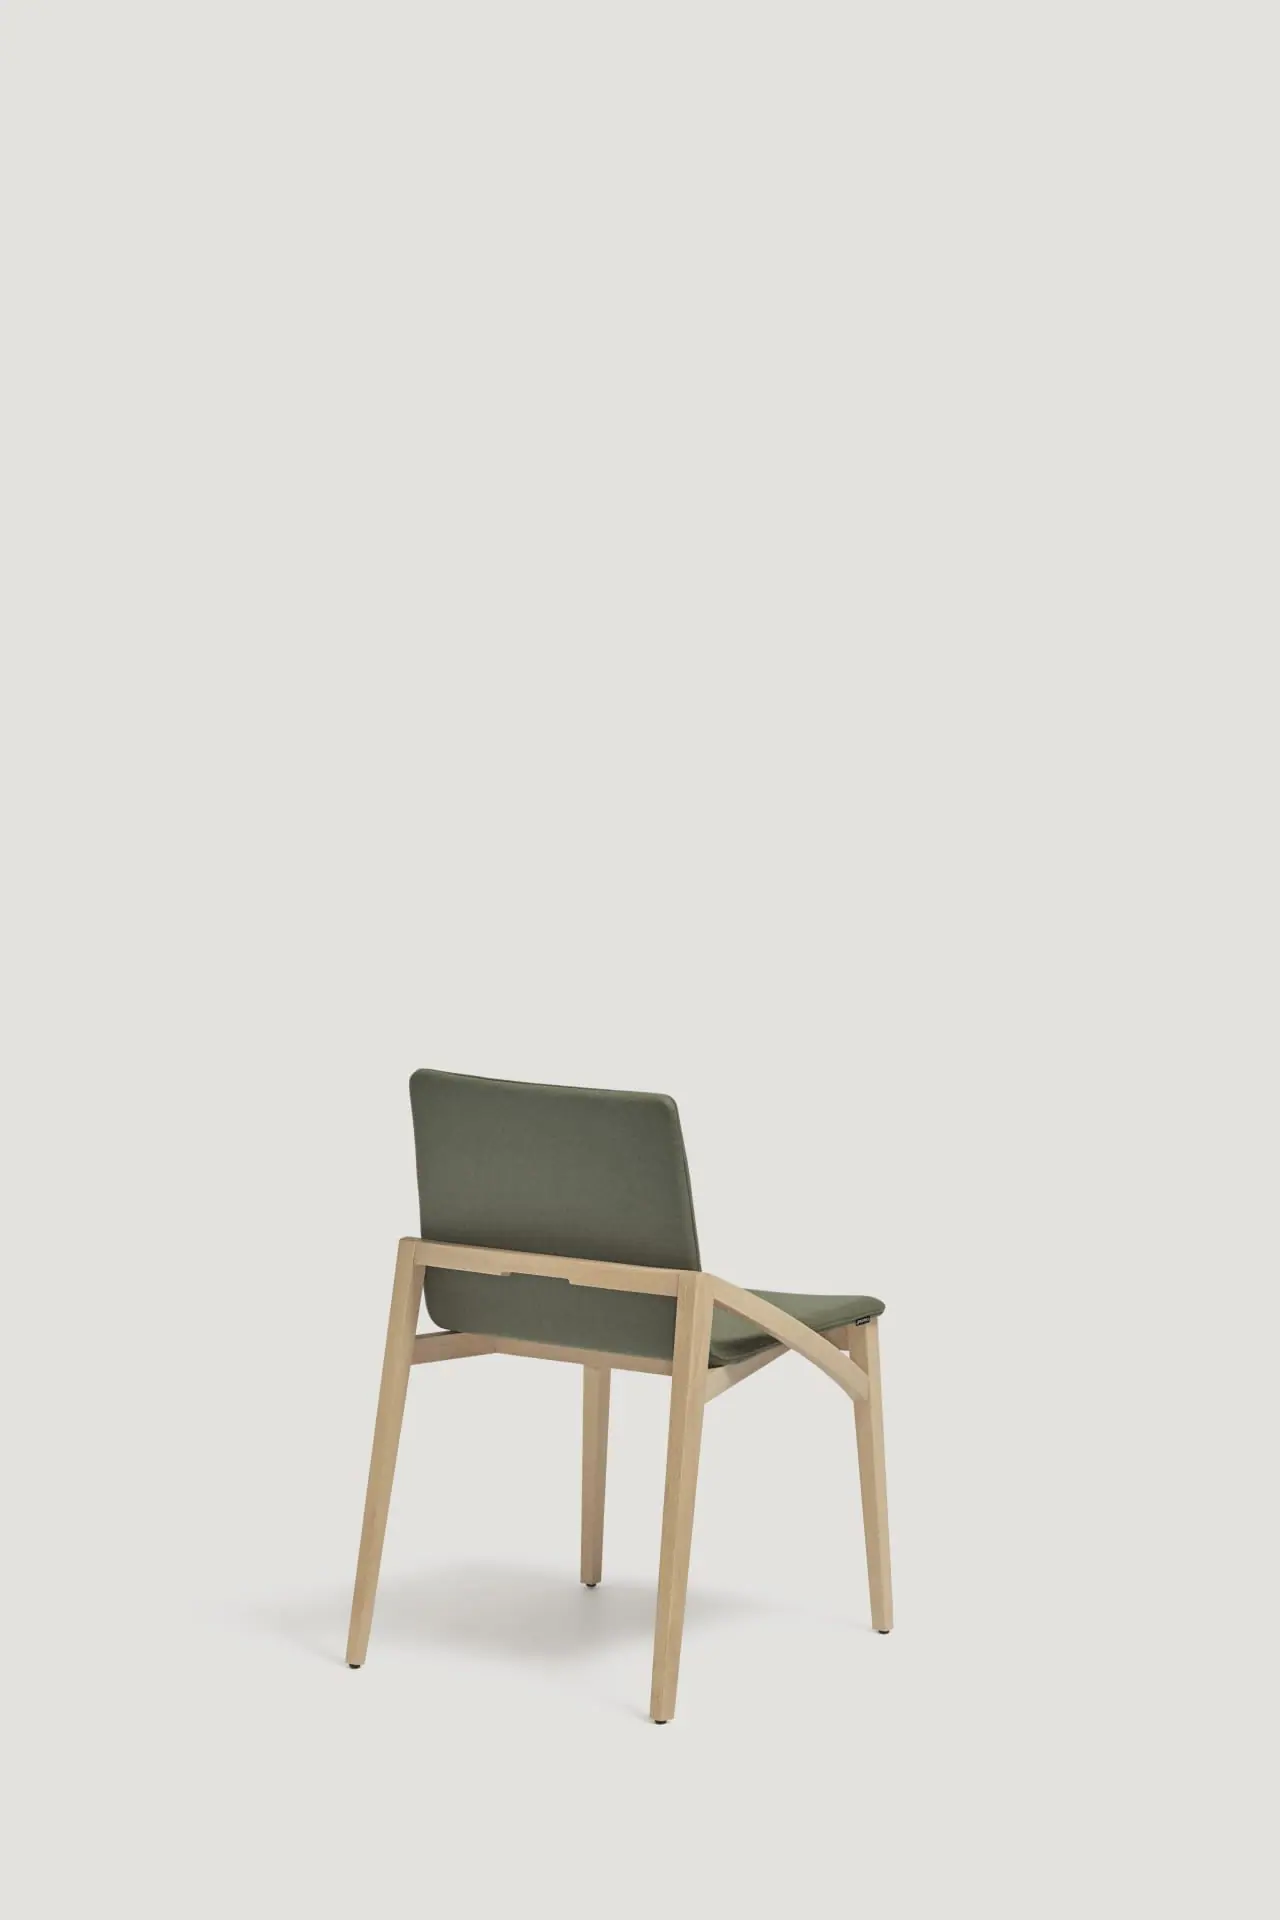 capdell-capita-chair-05